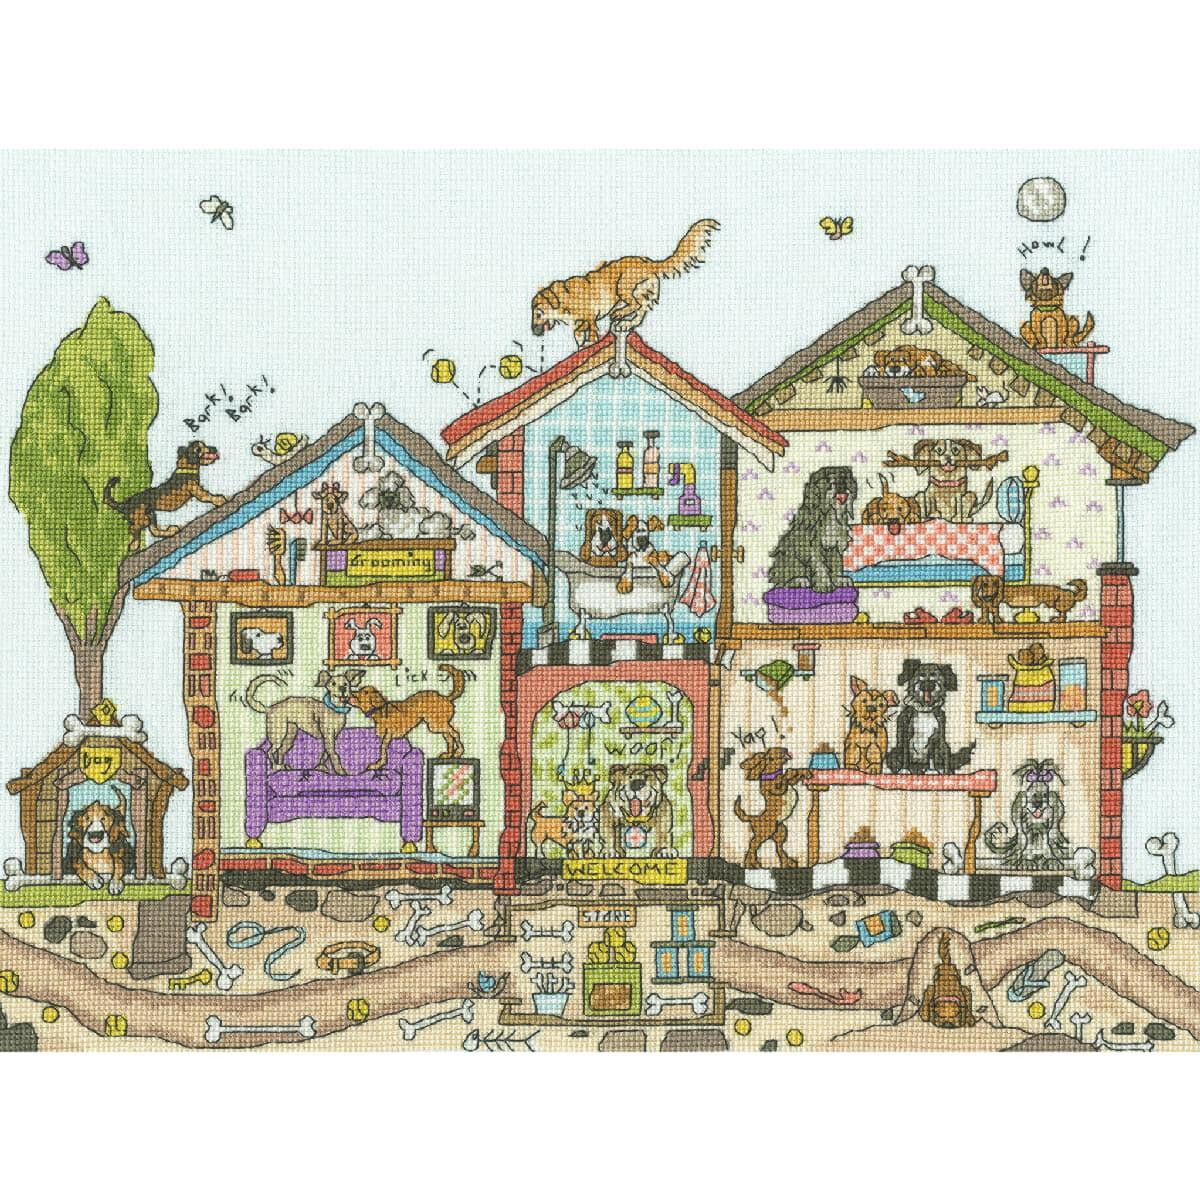 A whimsical dolls house with several rooms filled with...